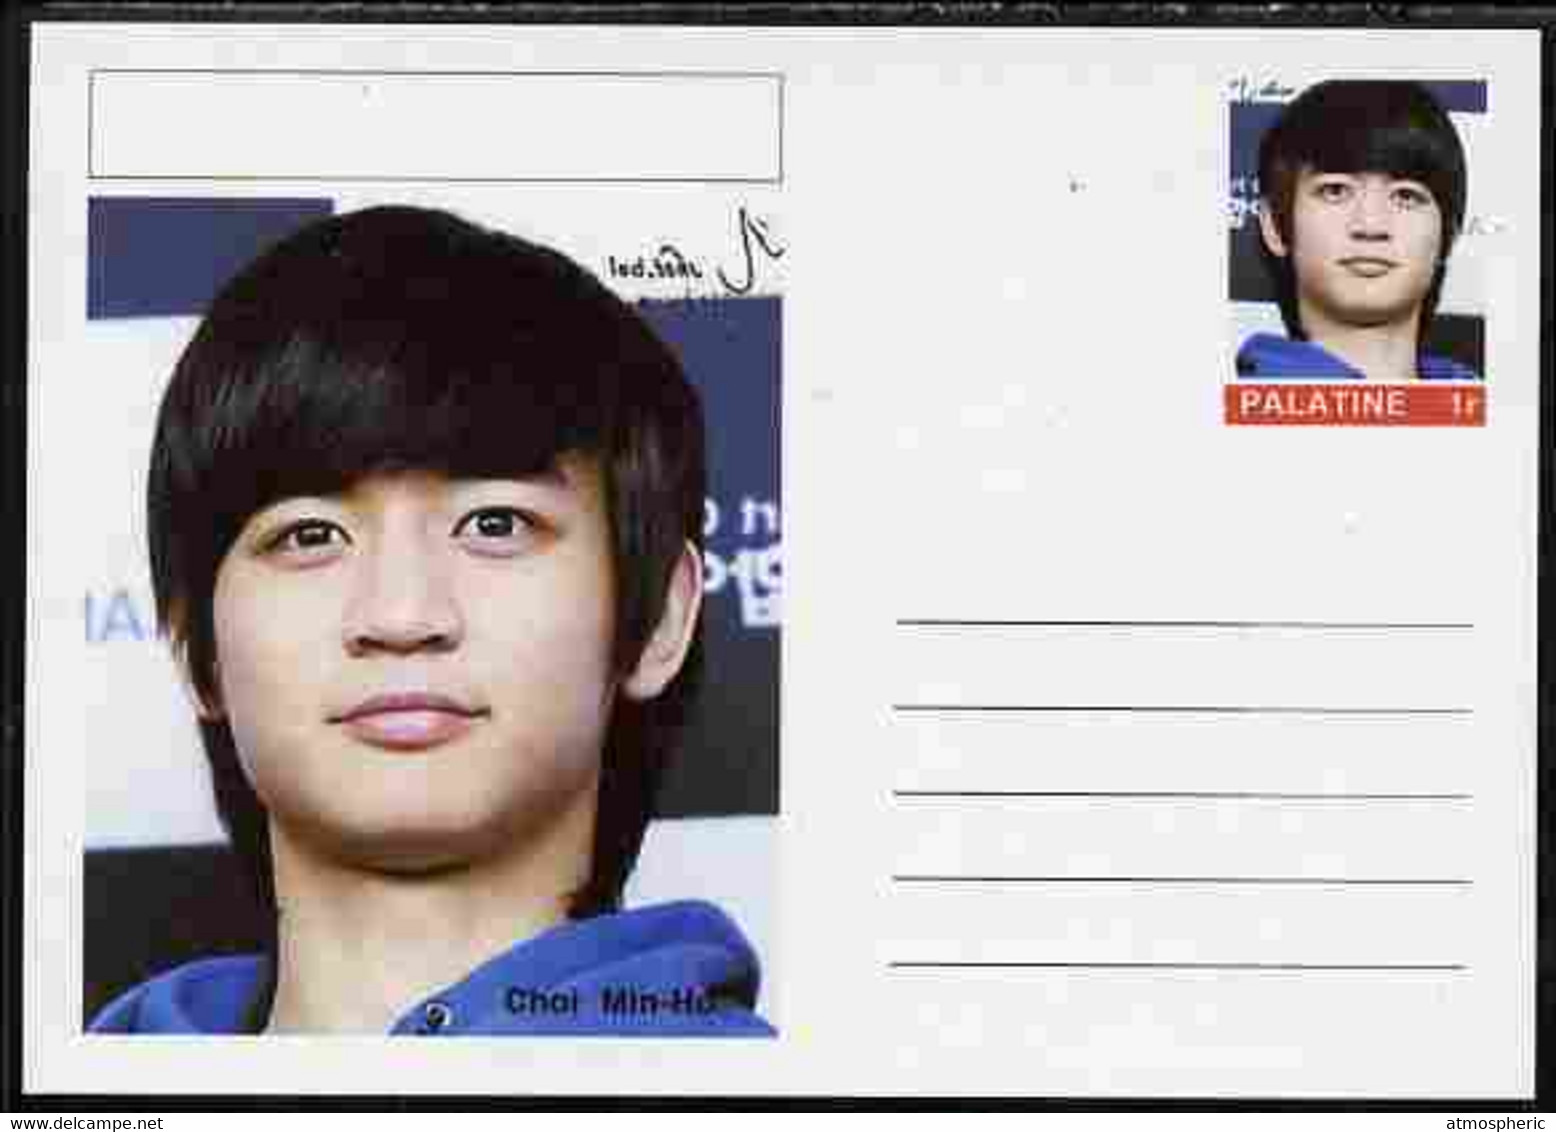 Palatine (Fantasy) Personalities - Choi Min-Ho (judo) Postal Stationery Card Unused And Fine - Artes Marciales